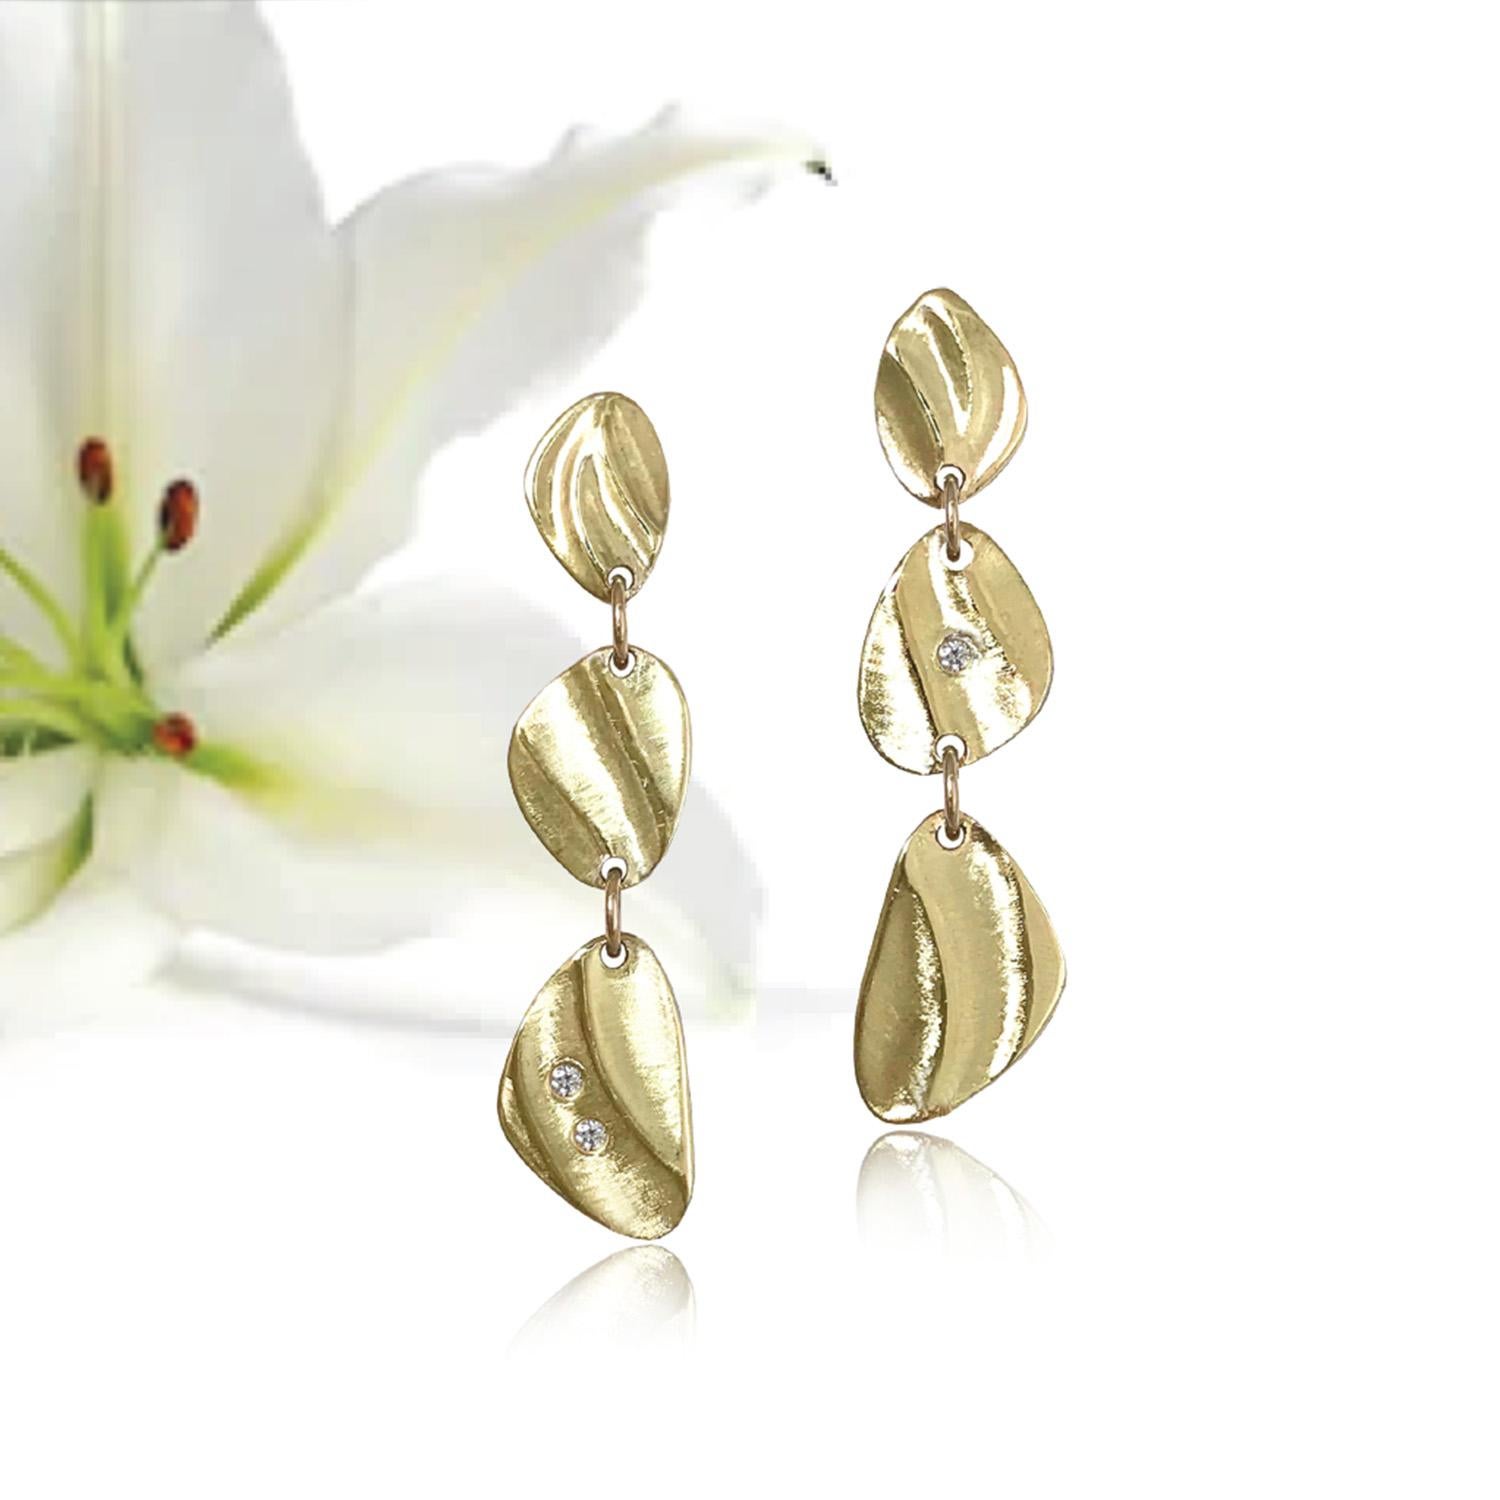 K.Mita's modern Mini Pebble Dangle Earrings from her Sand Dune Collection are handmade by the artist from 14 Karat Yellow Gold. The contemporary earrings, which are 31 mm long and 8 mm wide, are accented with three Diamonds (0.03 Carats total